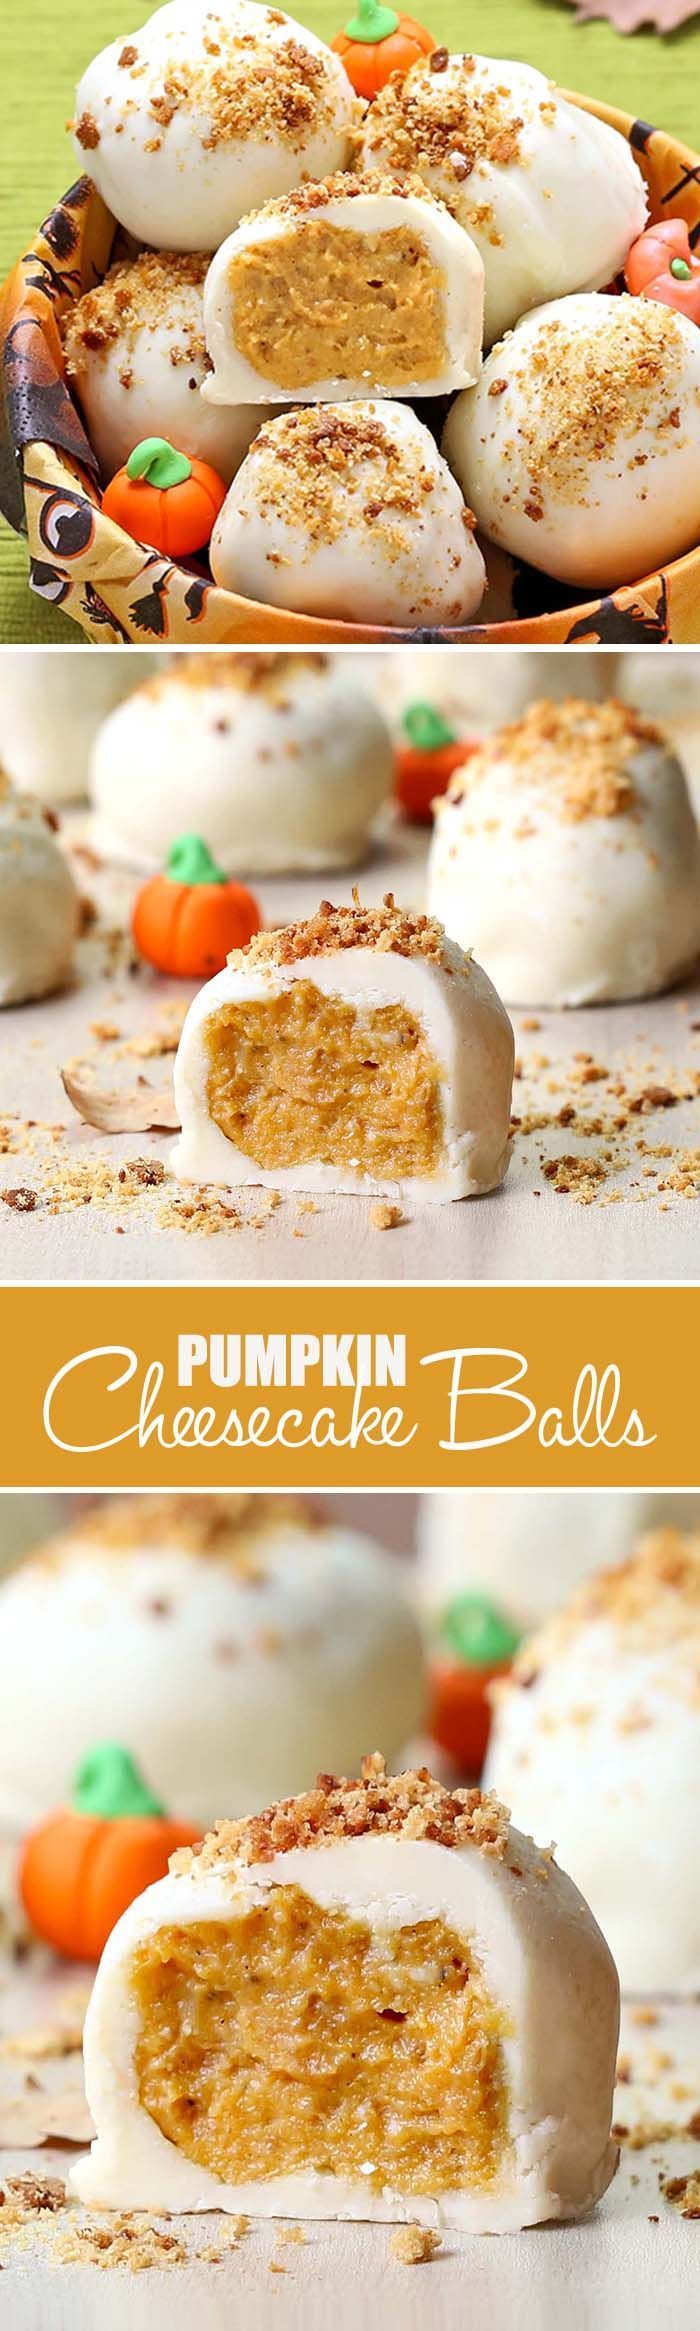 All the Best Fall Flavors in One Perfect Bite! Pumpkin and Cream Cheese combine with White Chocolate, Graham Crackers, and